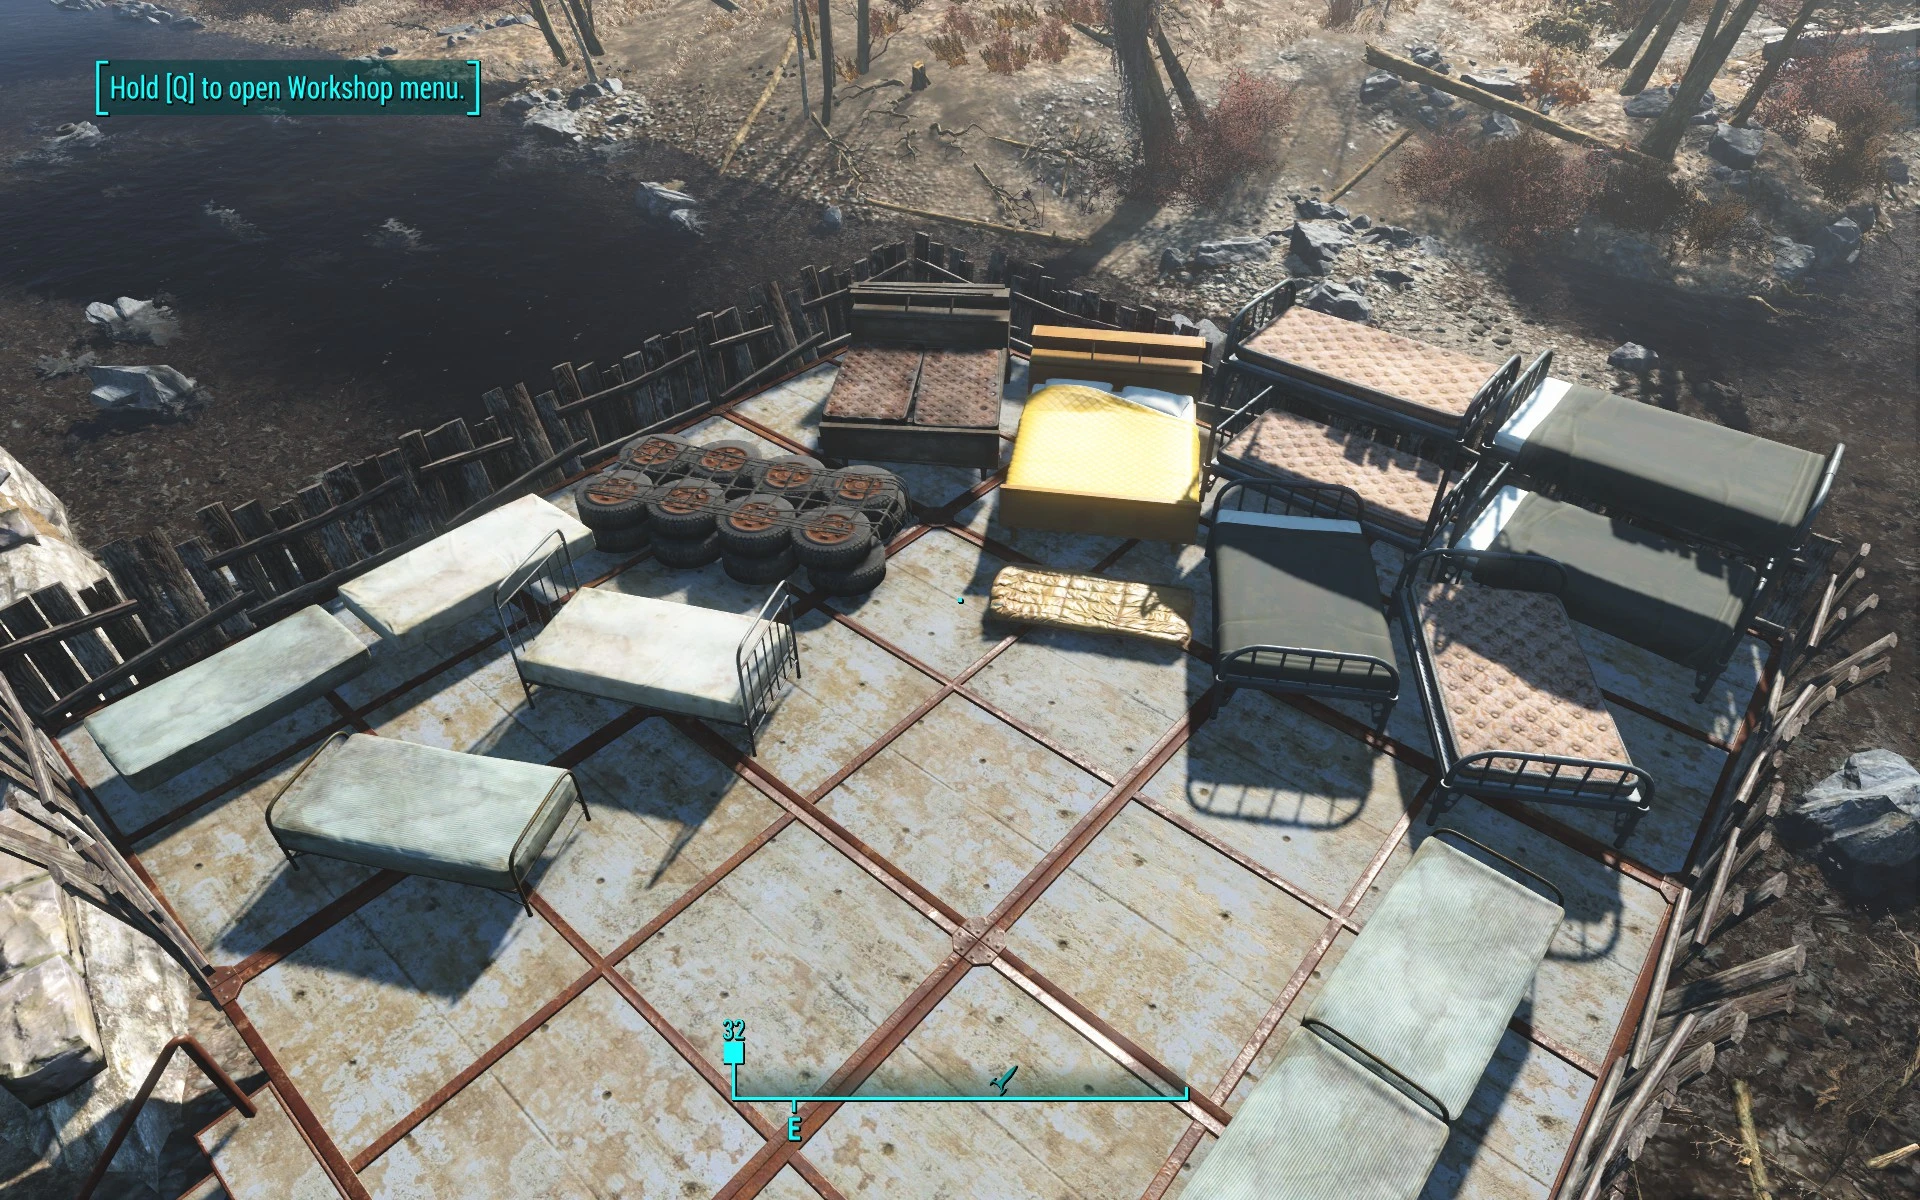 fallout 4 beds sheltered console command